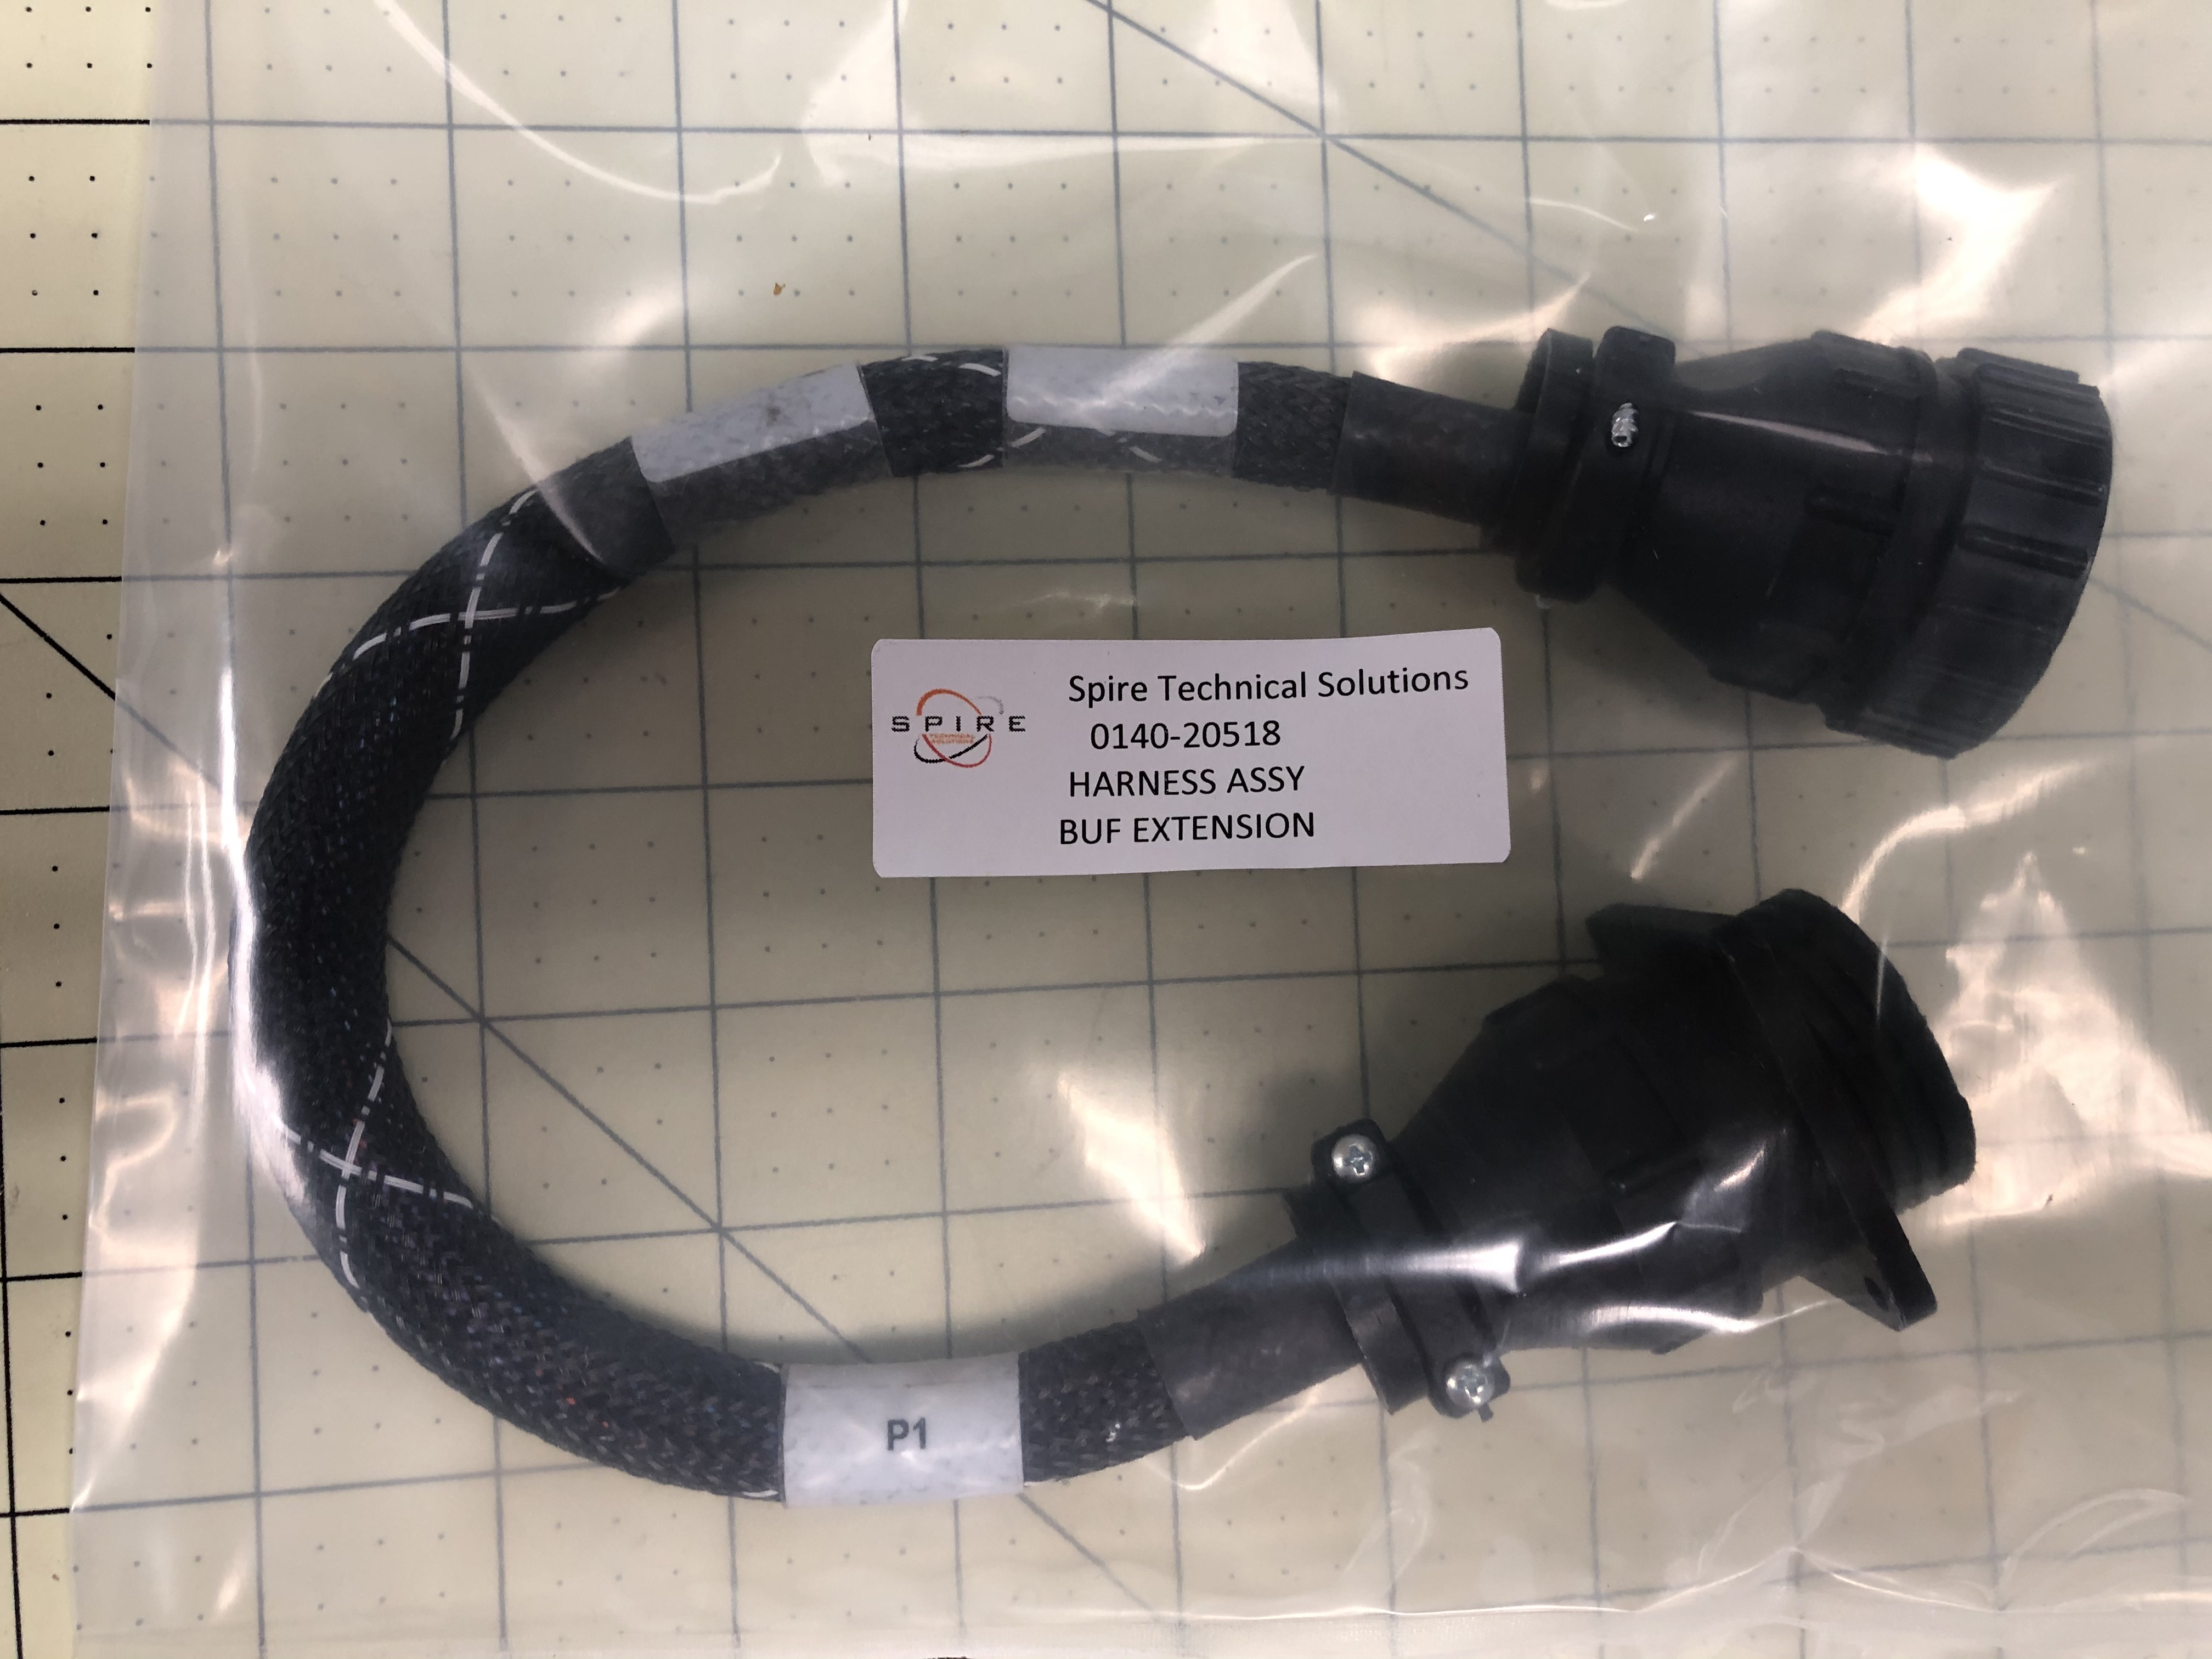 HARNESS ASSY BUF EXTENSION